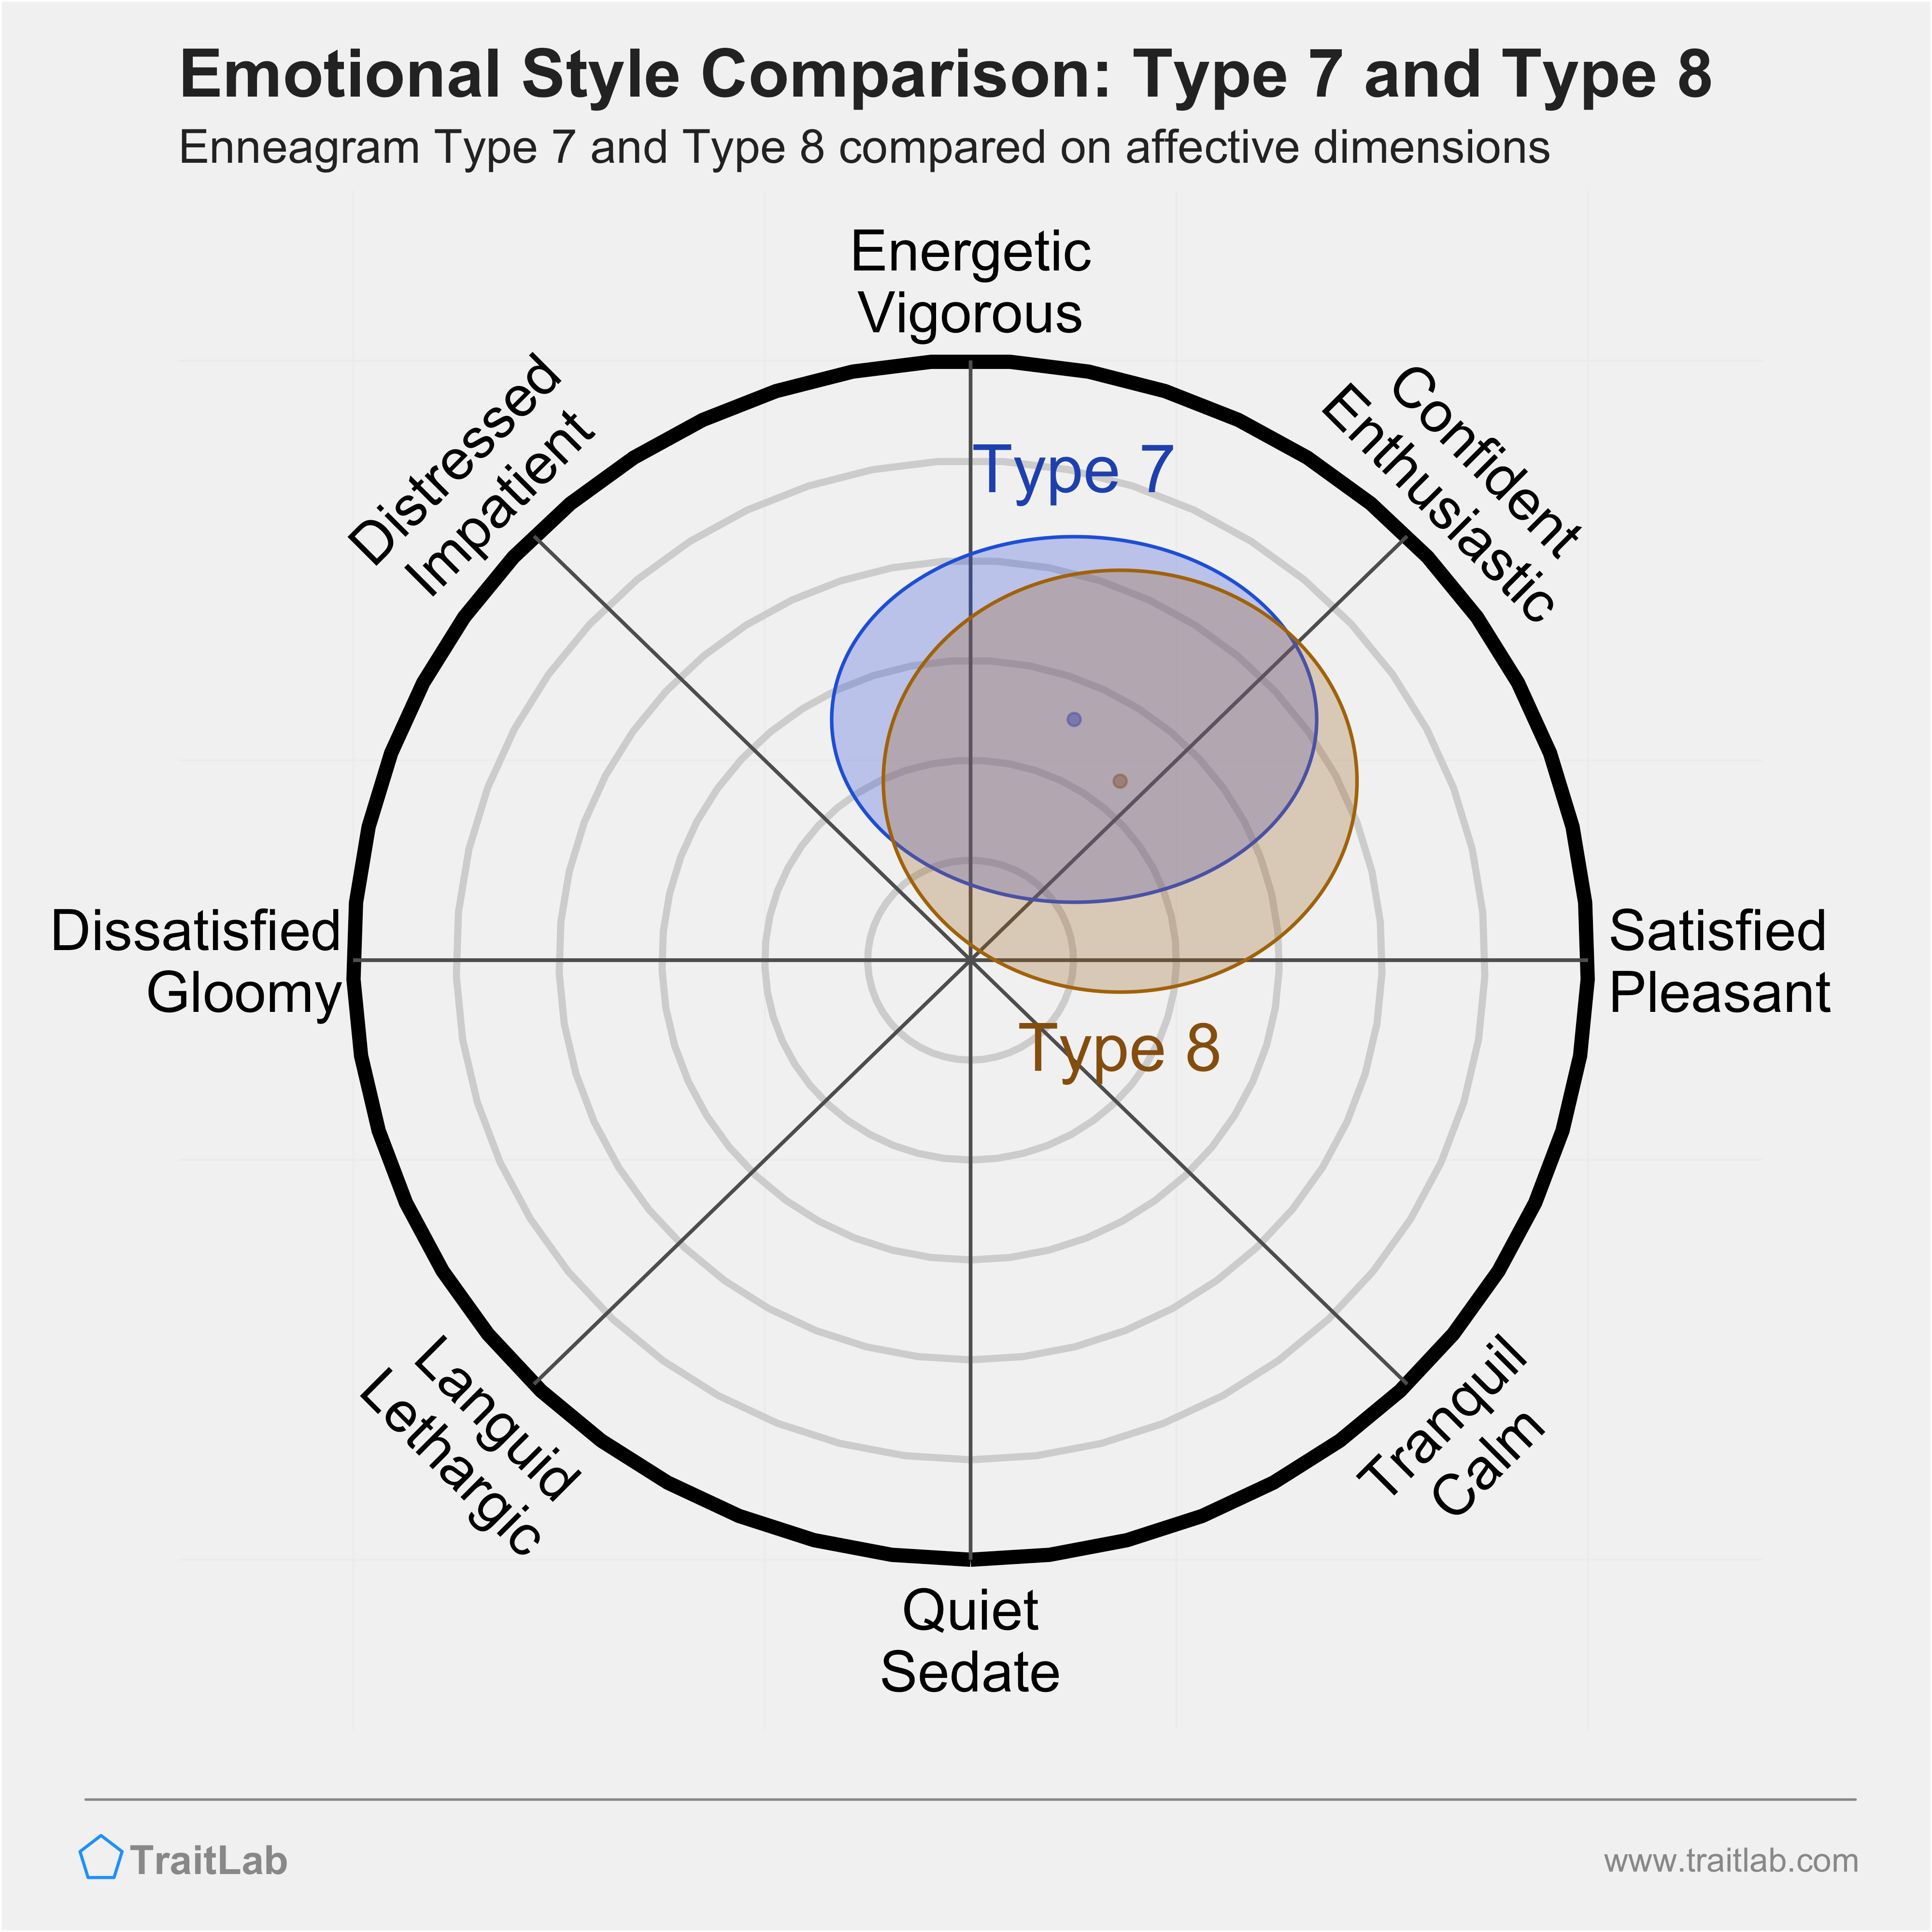 Type 7 and Type 8 comparison across emotional (affective) dimensions